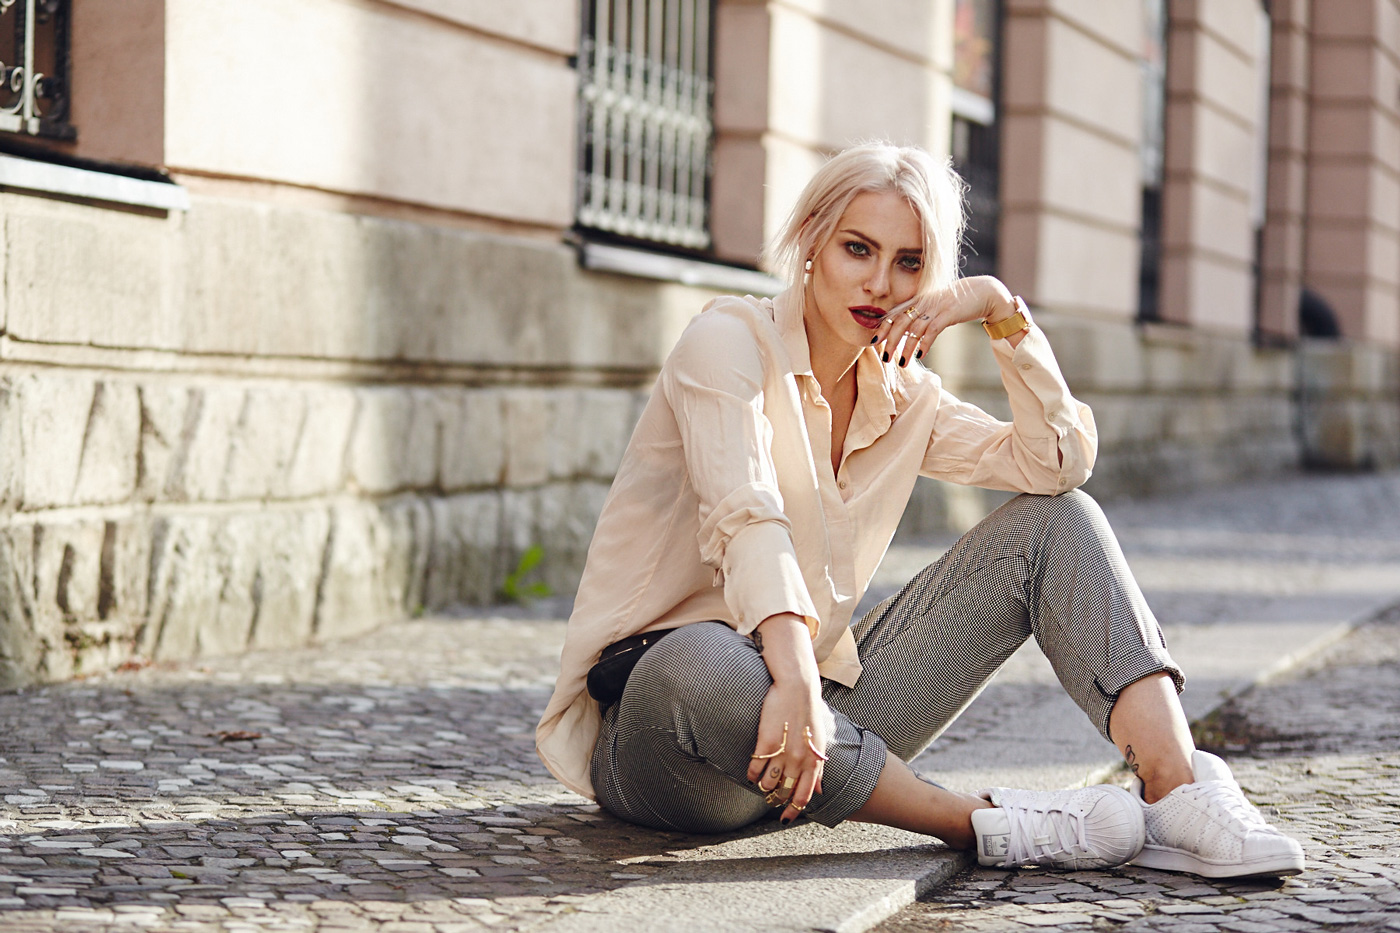 street style from Berlin via Masha Sedgwick | casual office fashion outfit | Masha is wearing Adidas Superstar sneaker, a black Elizabeth & James belt bag, a golden hand cuff, a nude silk shirt, a hound's-tooth checked pants